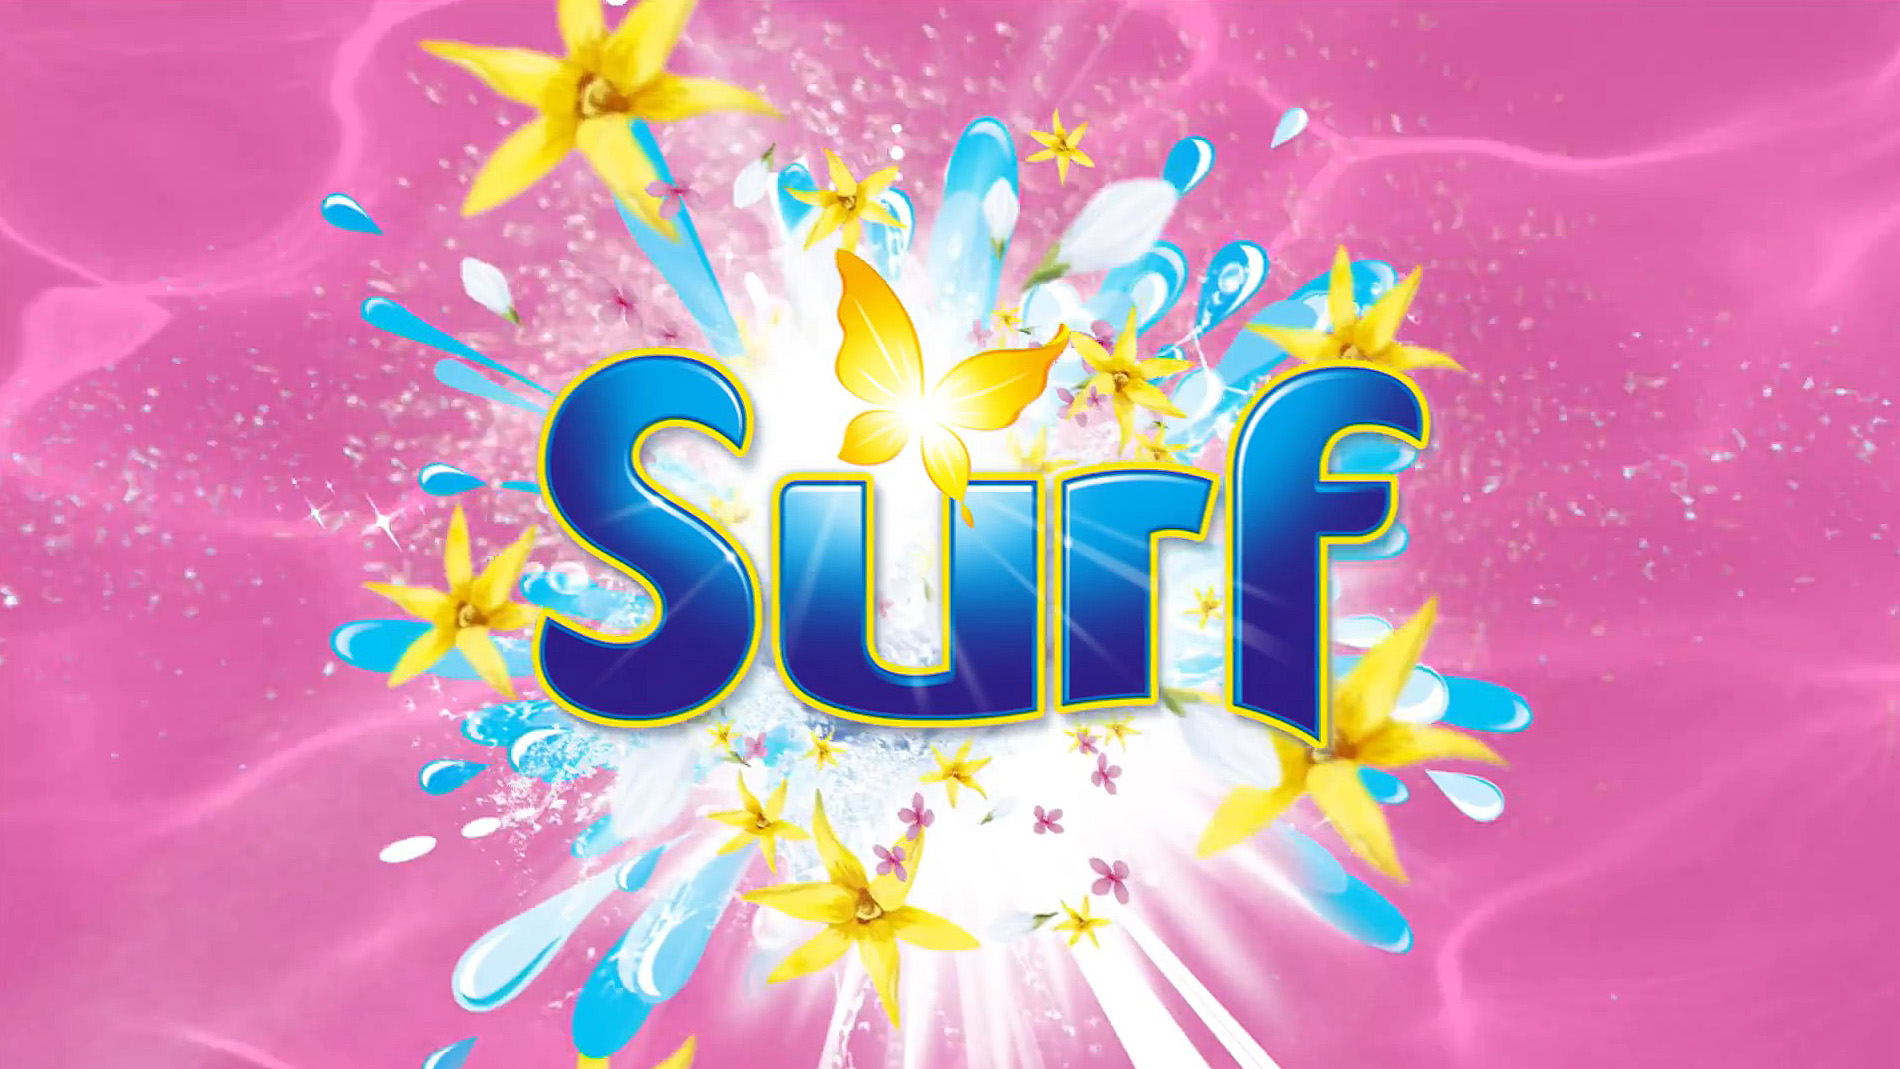 Surf - Advertisement for laundry detergent